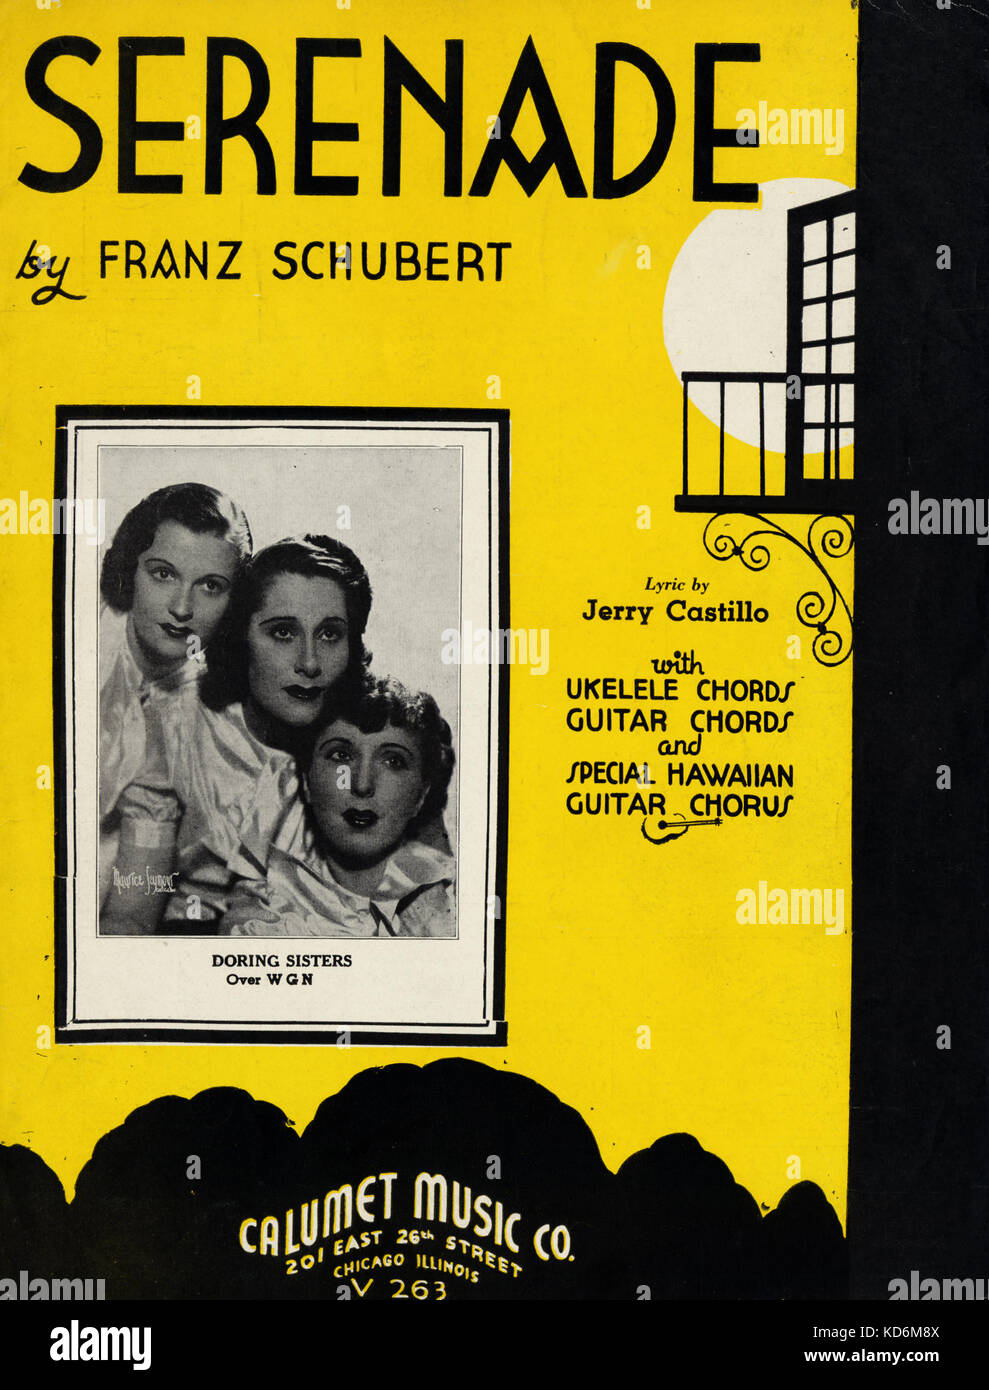 SCHUBERT, Franz  -  Doring sisters on score cover performing version of  the Austrian composer 's 'Serenade'.  Lyrics by Jerry Castillo, published by Calumet Music Company, Chicago, 1935. (Schubert: 1797-1828) Stock Photo